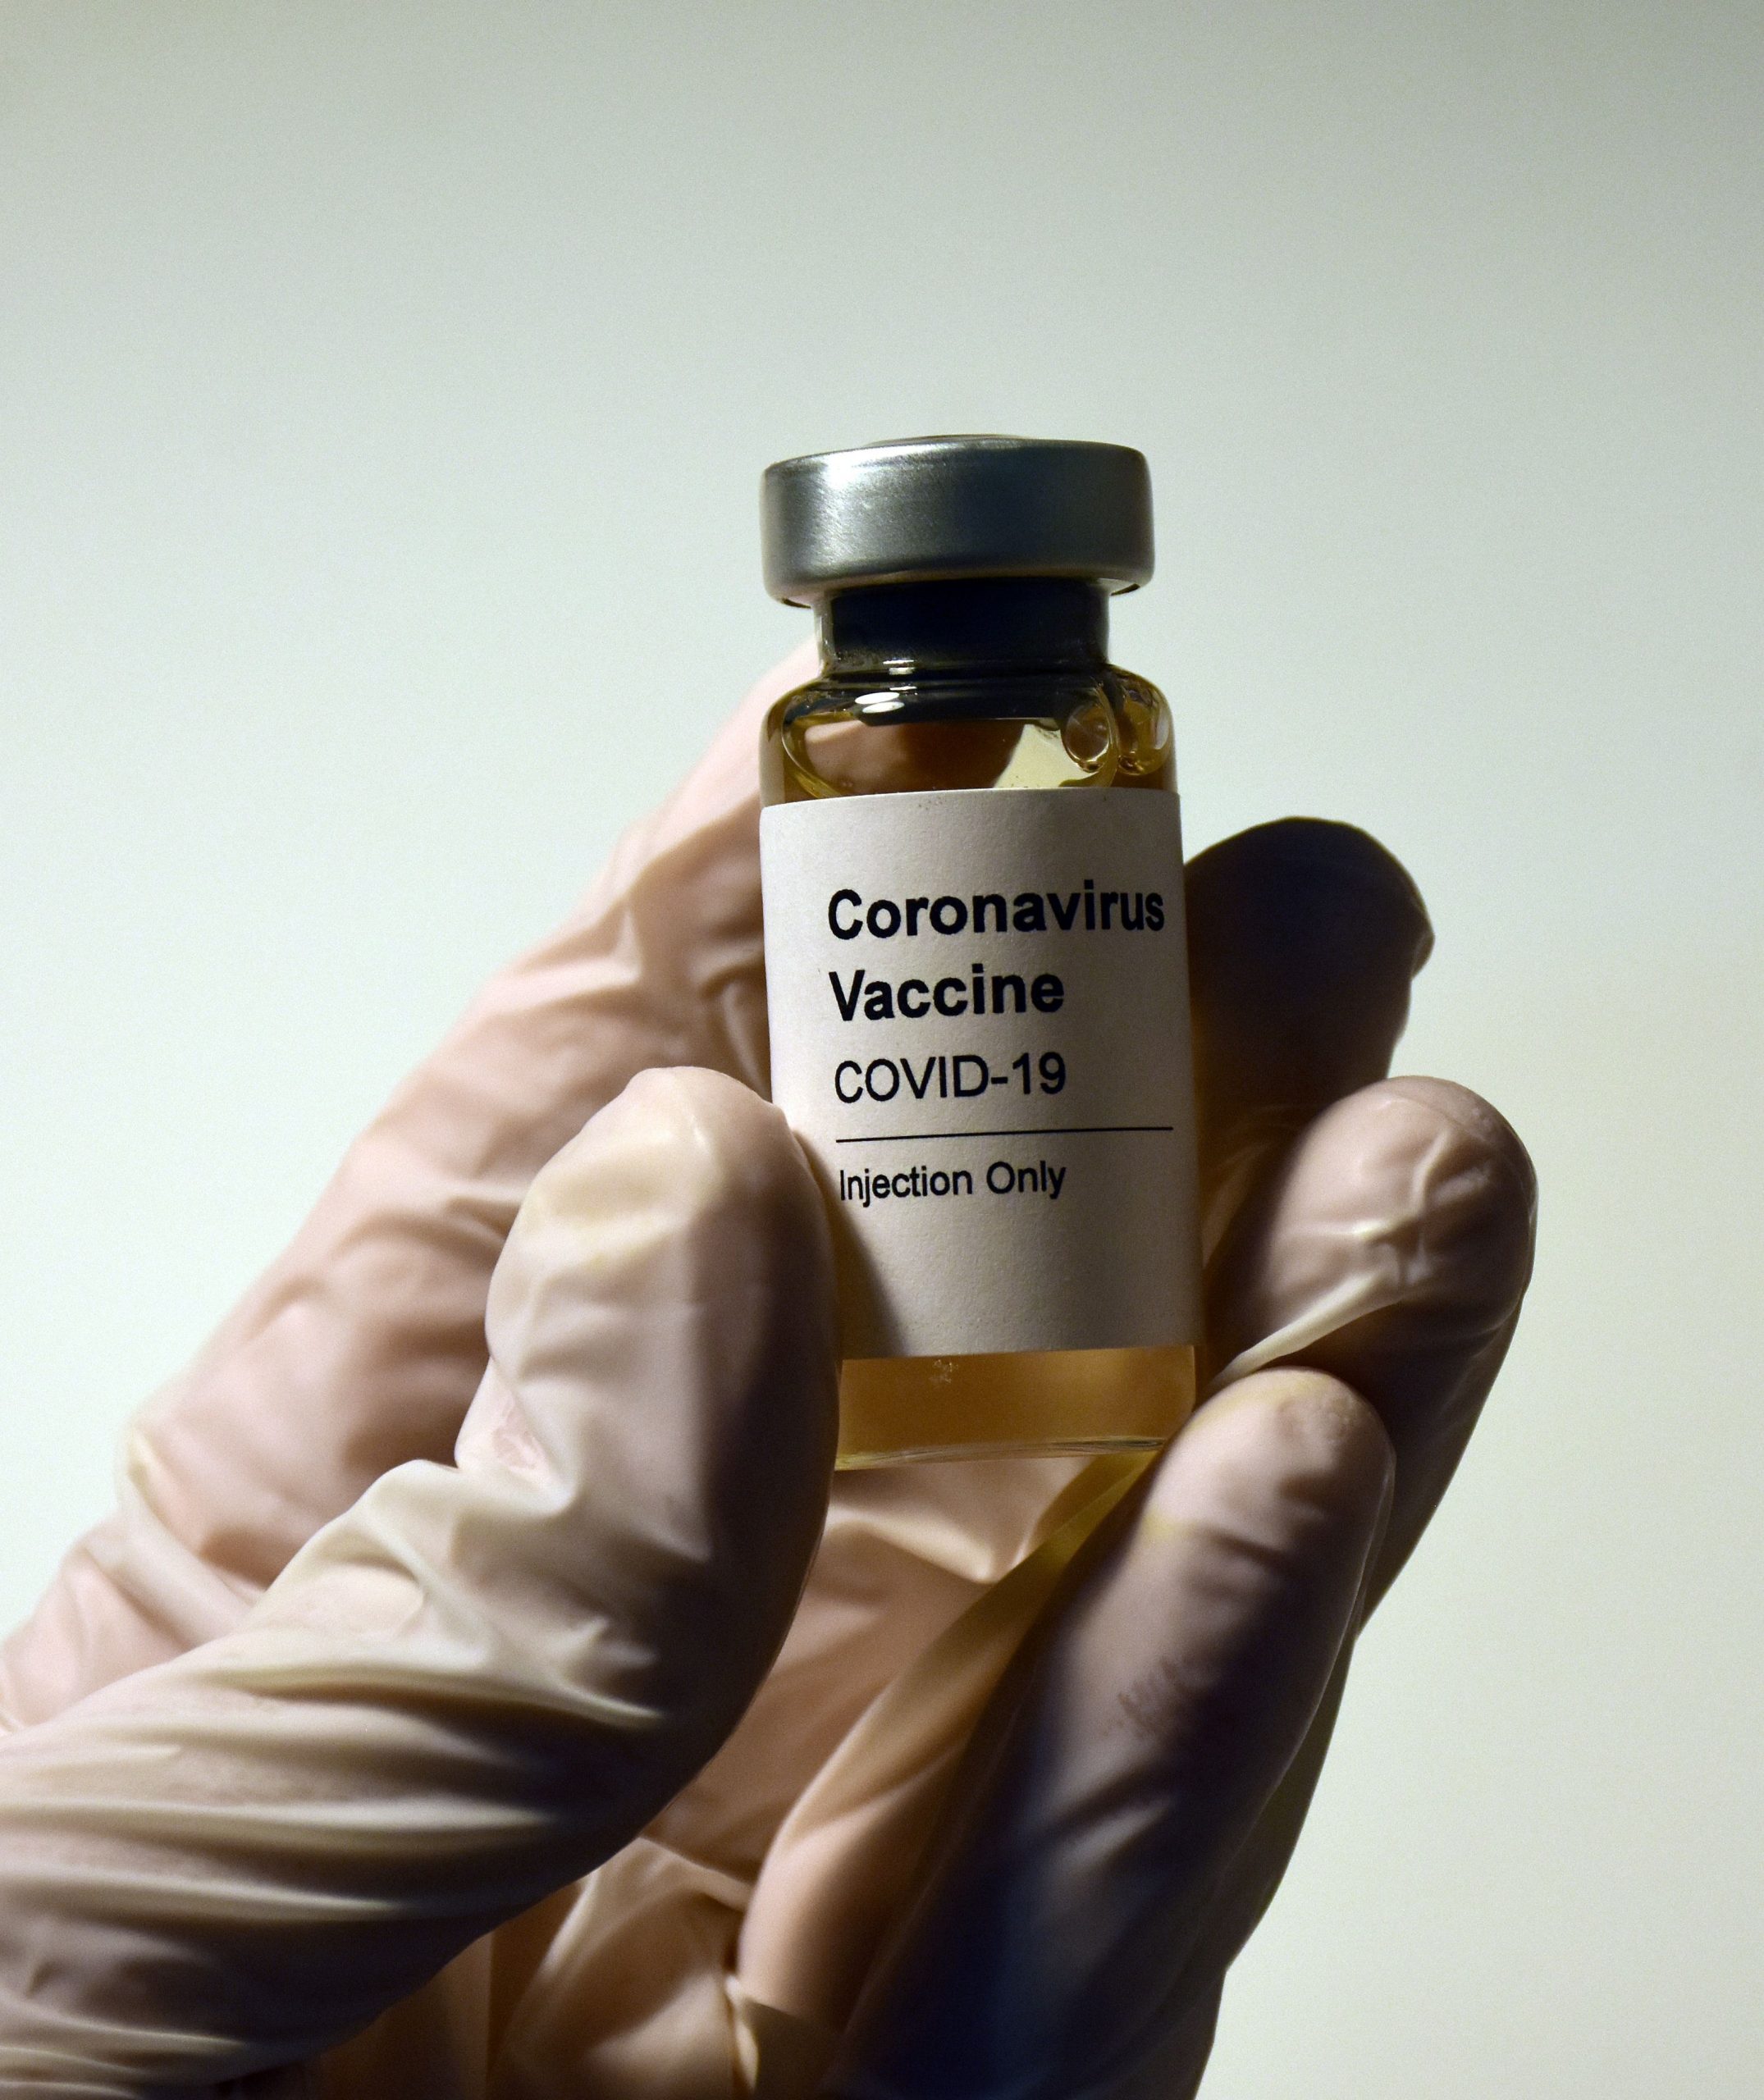 Reports claiming 12-year old Italian tennis player died of COVID vaccine are fake